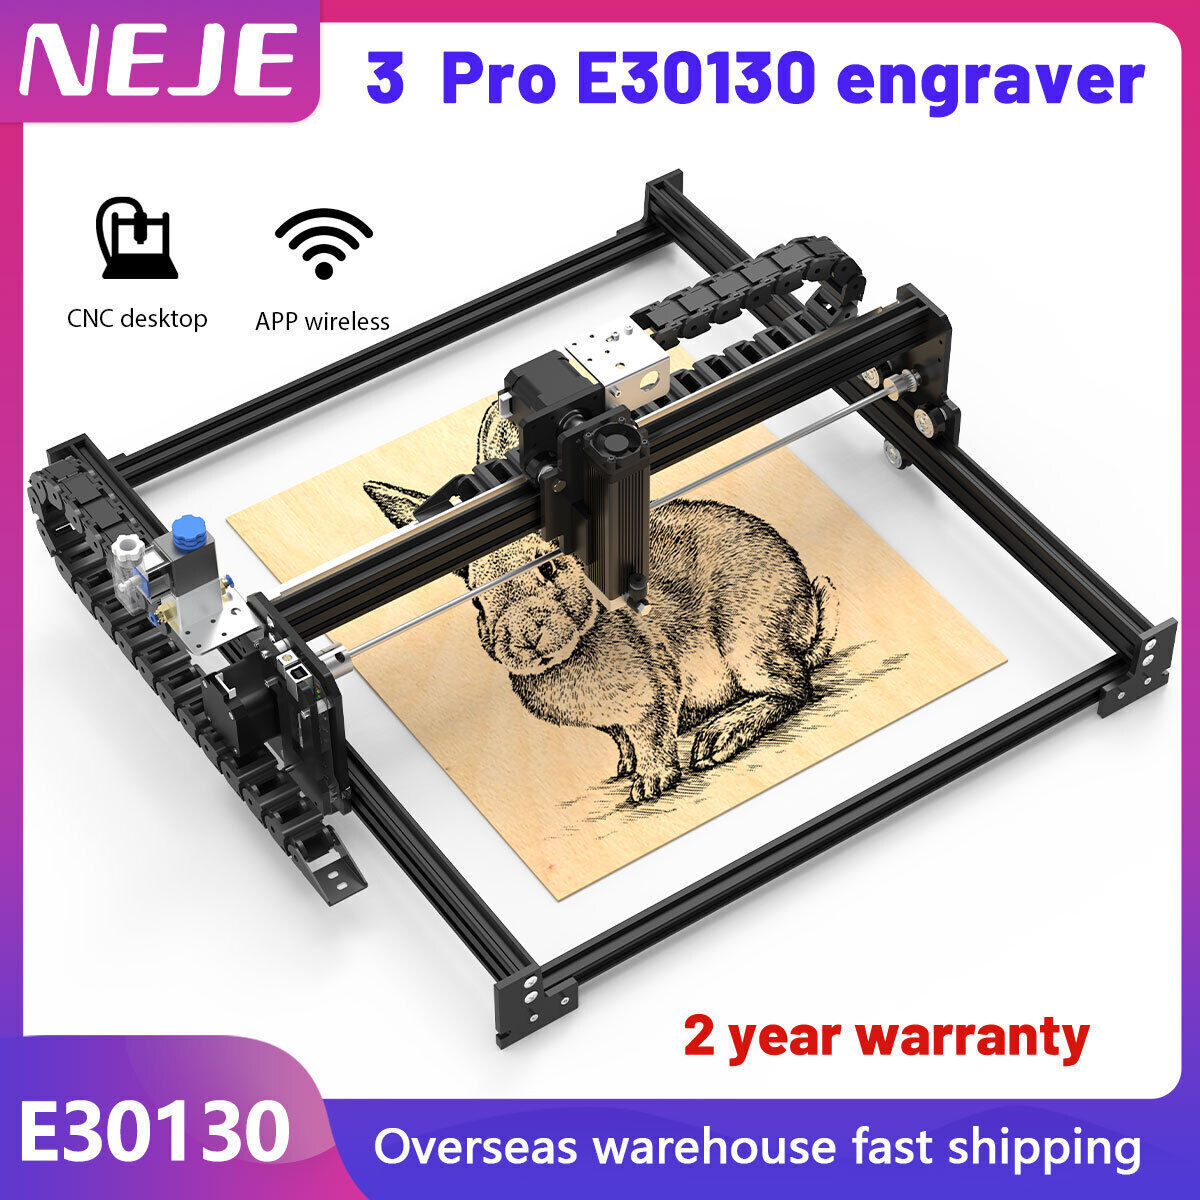 NEJE 3 PRO E30130 high precision laser cutter engraver 400 x410mm 6W fixed laser